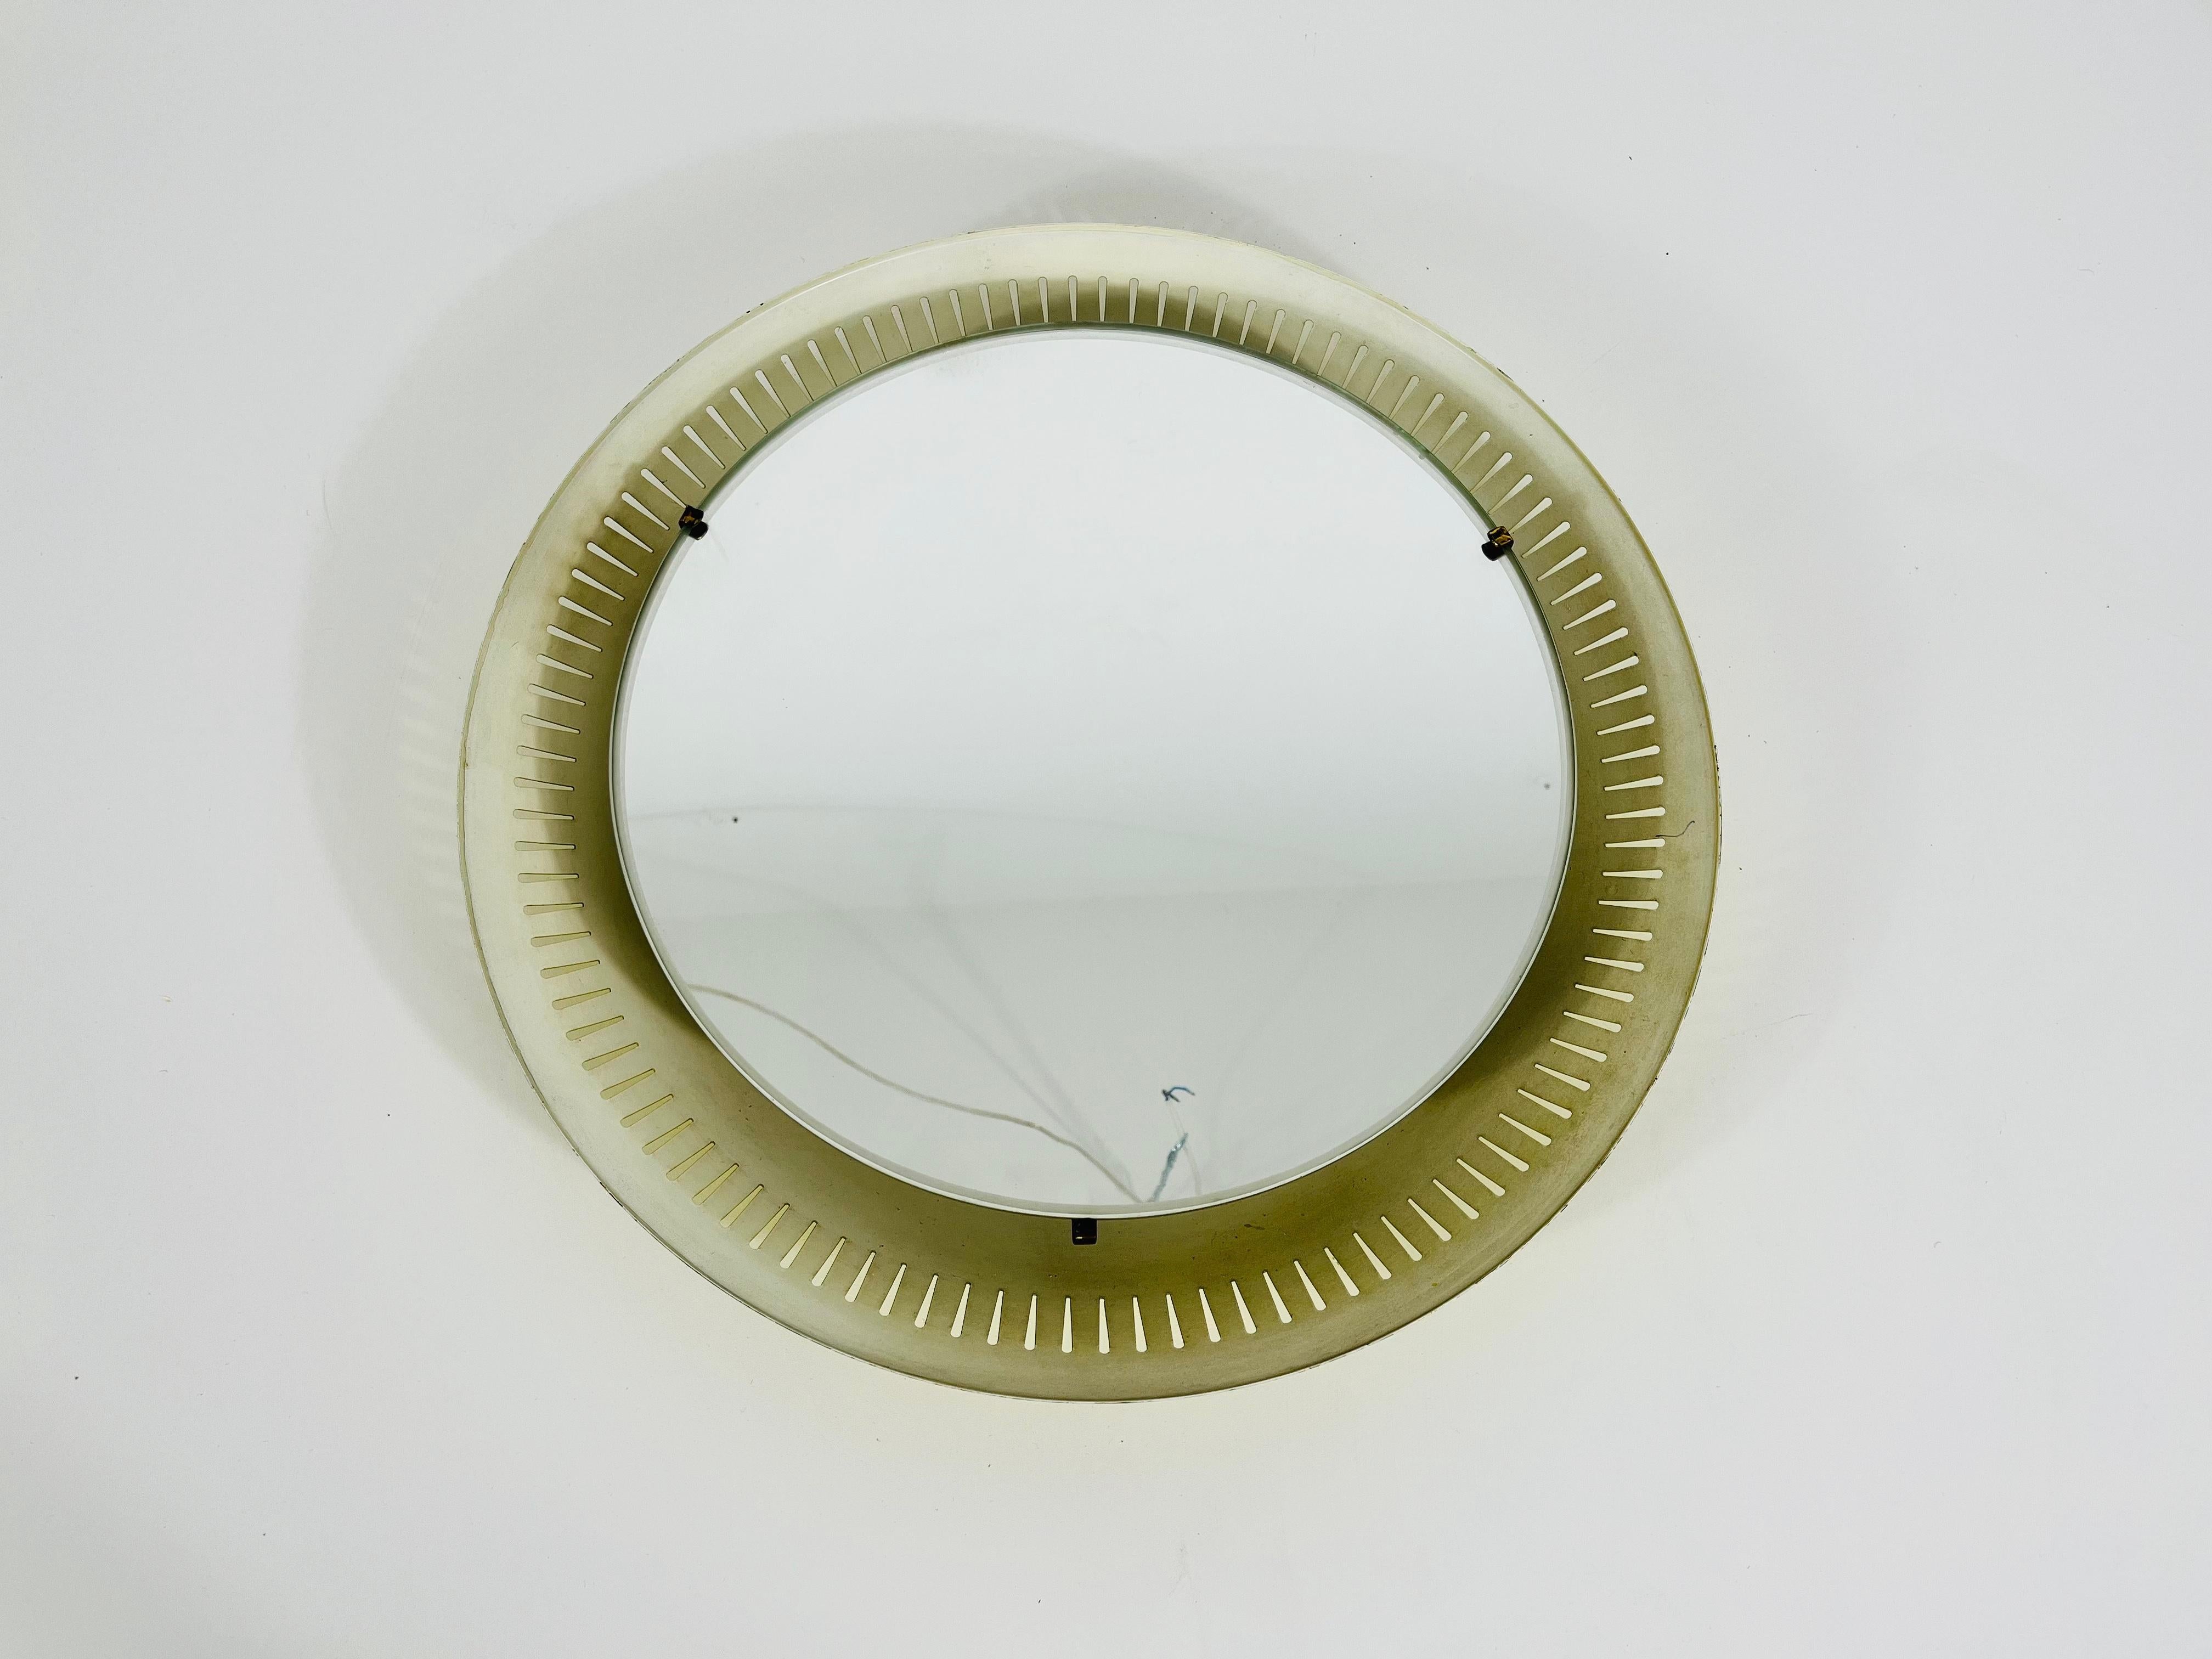 A Hillebrand illuminated wall mirror from the 1950s made in Germany. The mirror has a round metal design. There are E14 light bulbs inside the frame. Brass screws which secure the glass to the aluminium frame. 

The mirror is in a good vintage